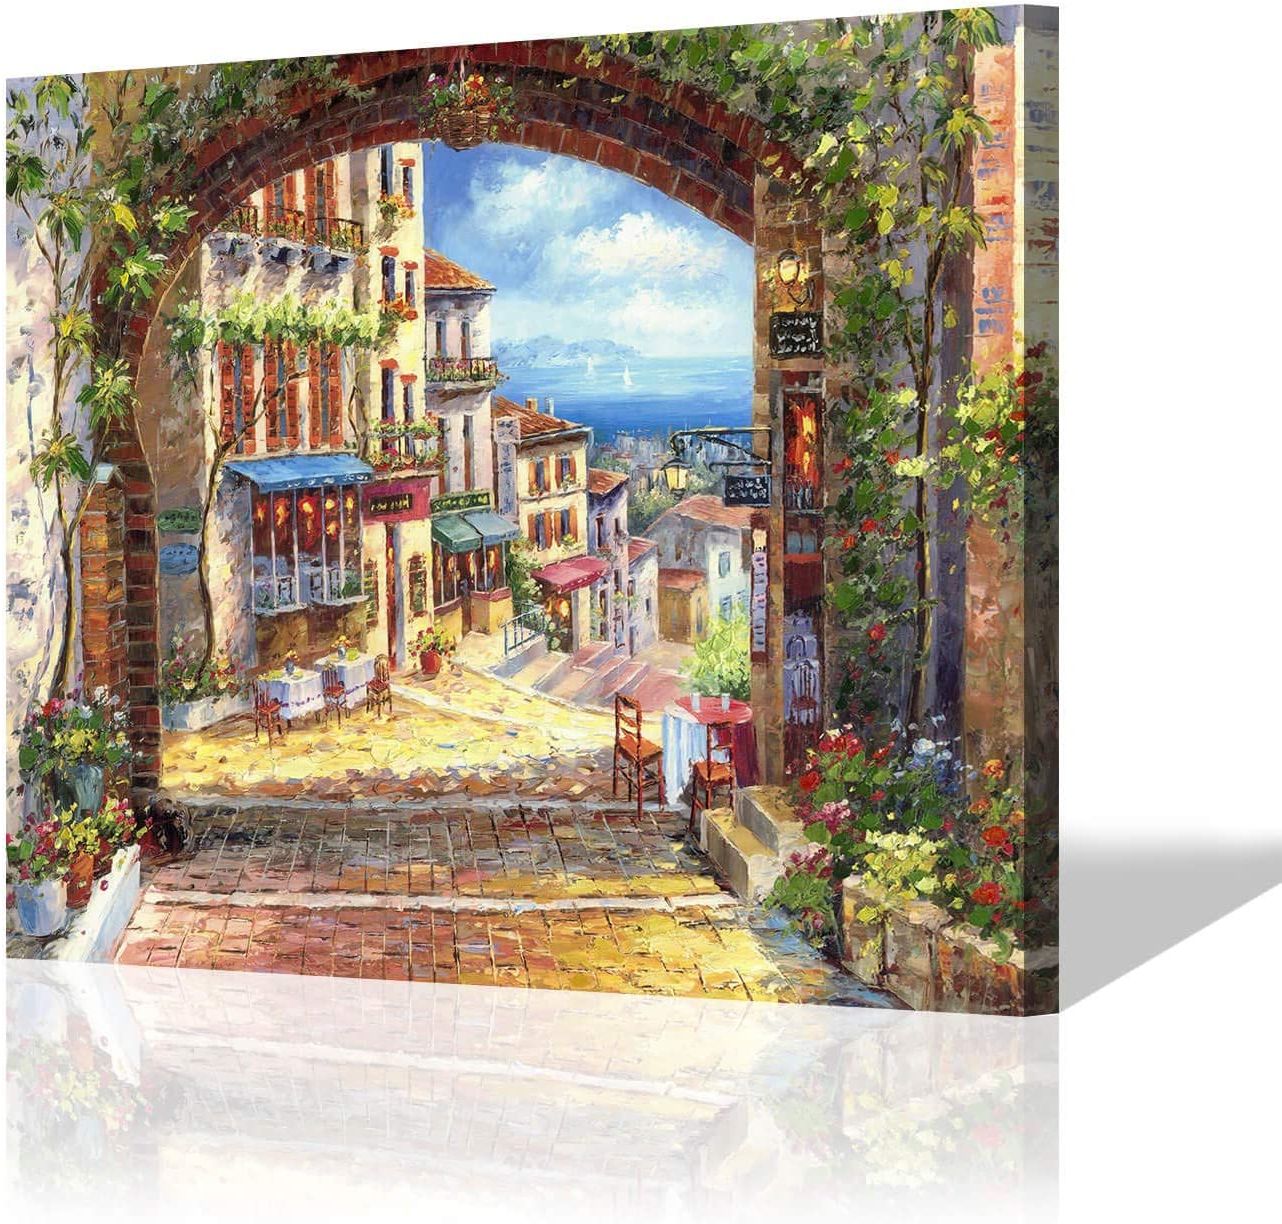 Town Wall Art Throughout Widely Used Buy Sd Soft Dance Italian Town Canvas Wall Art – Coastal Village Painting  Artwork Reproduction Print Decor For Living Room 24'' X 18'' X 1 Panel  Online At Lowest Price In Italy (View 2 of 15)